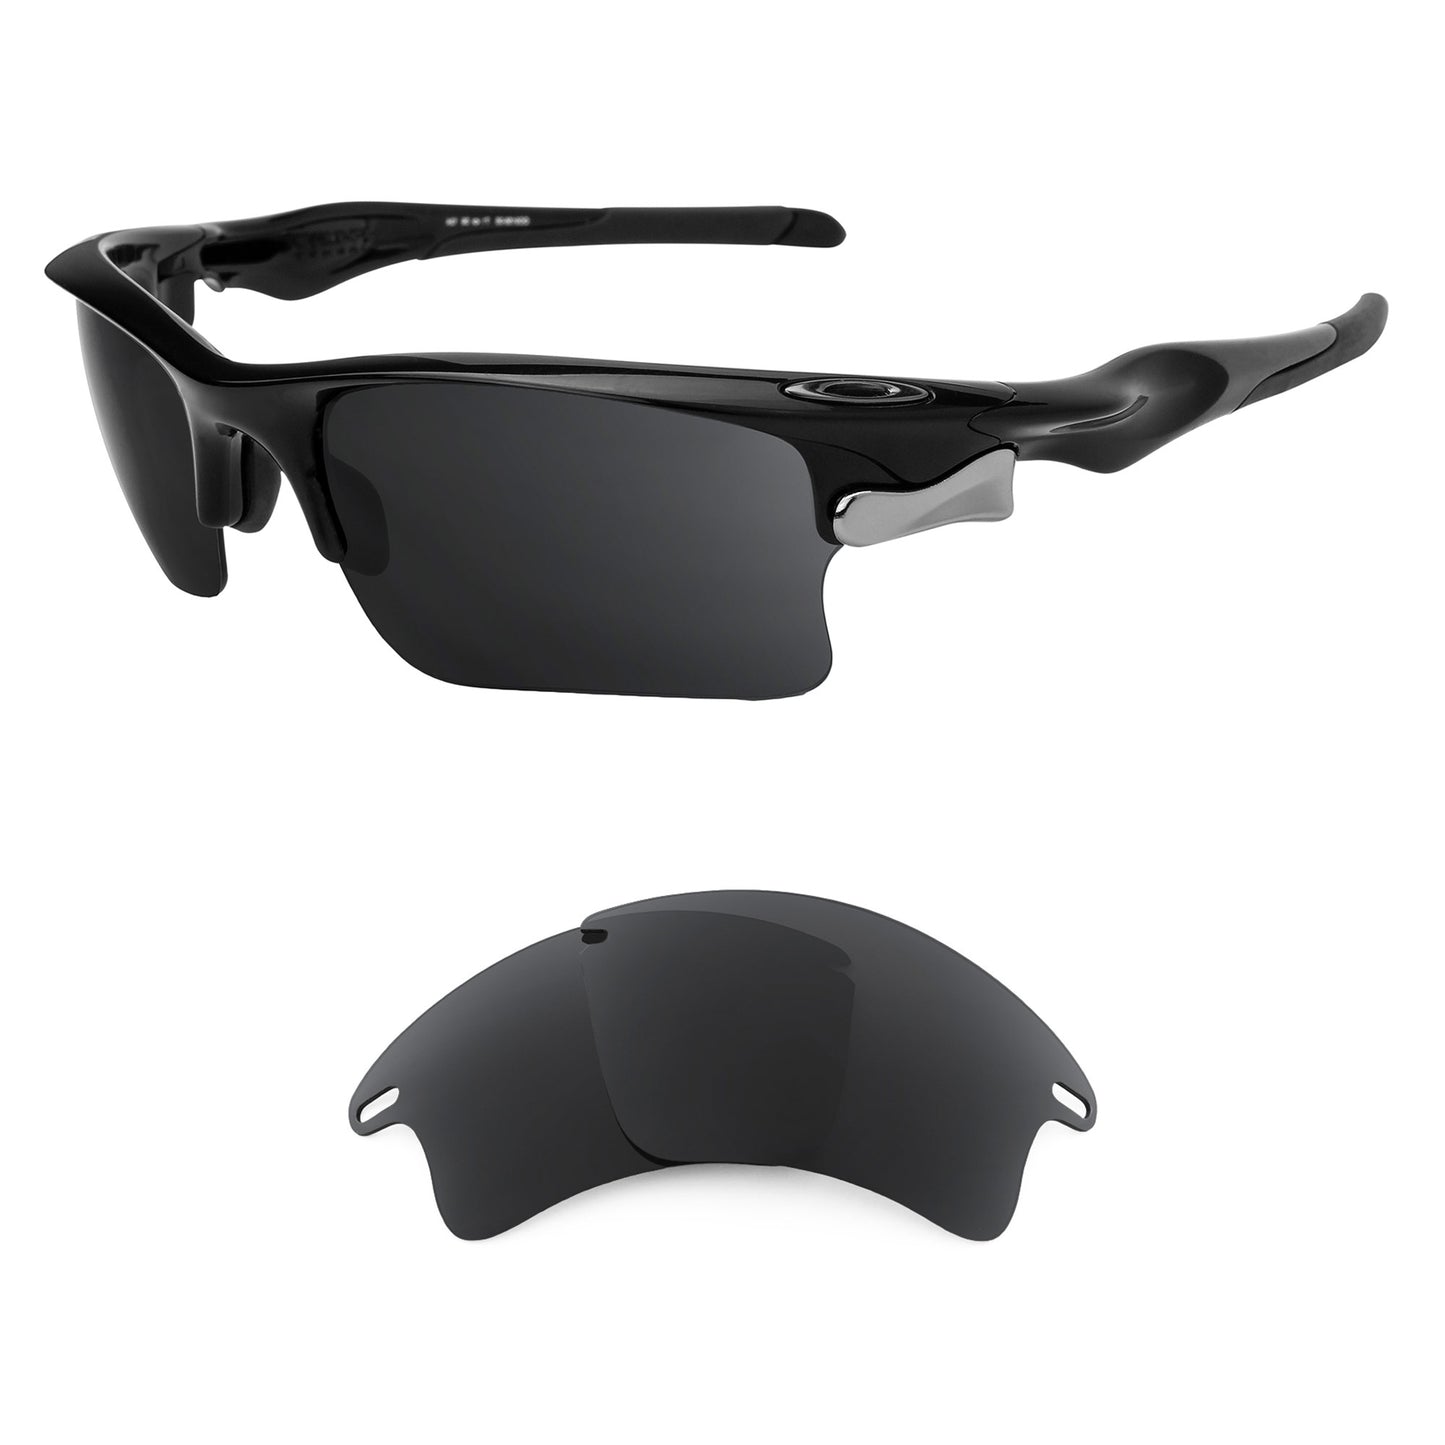 Oakley Fast Jacket XL sunglasses with replacement lenses